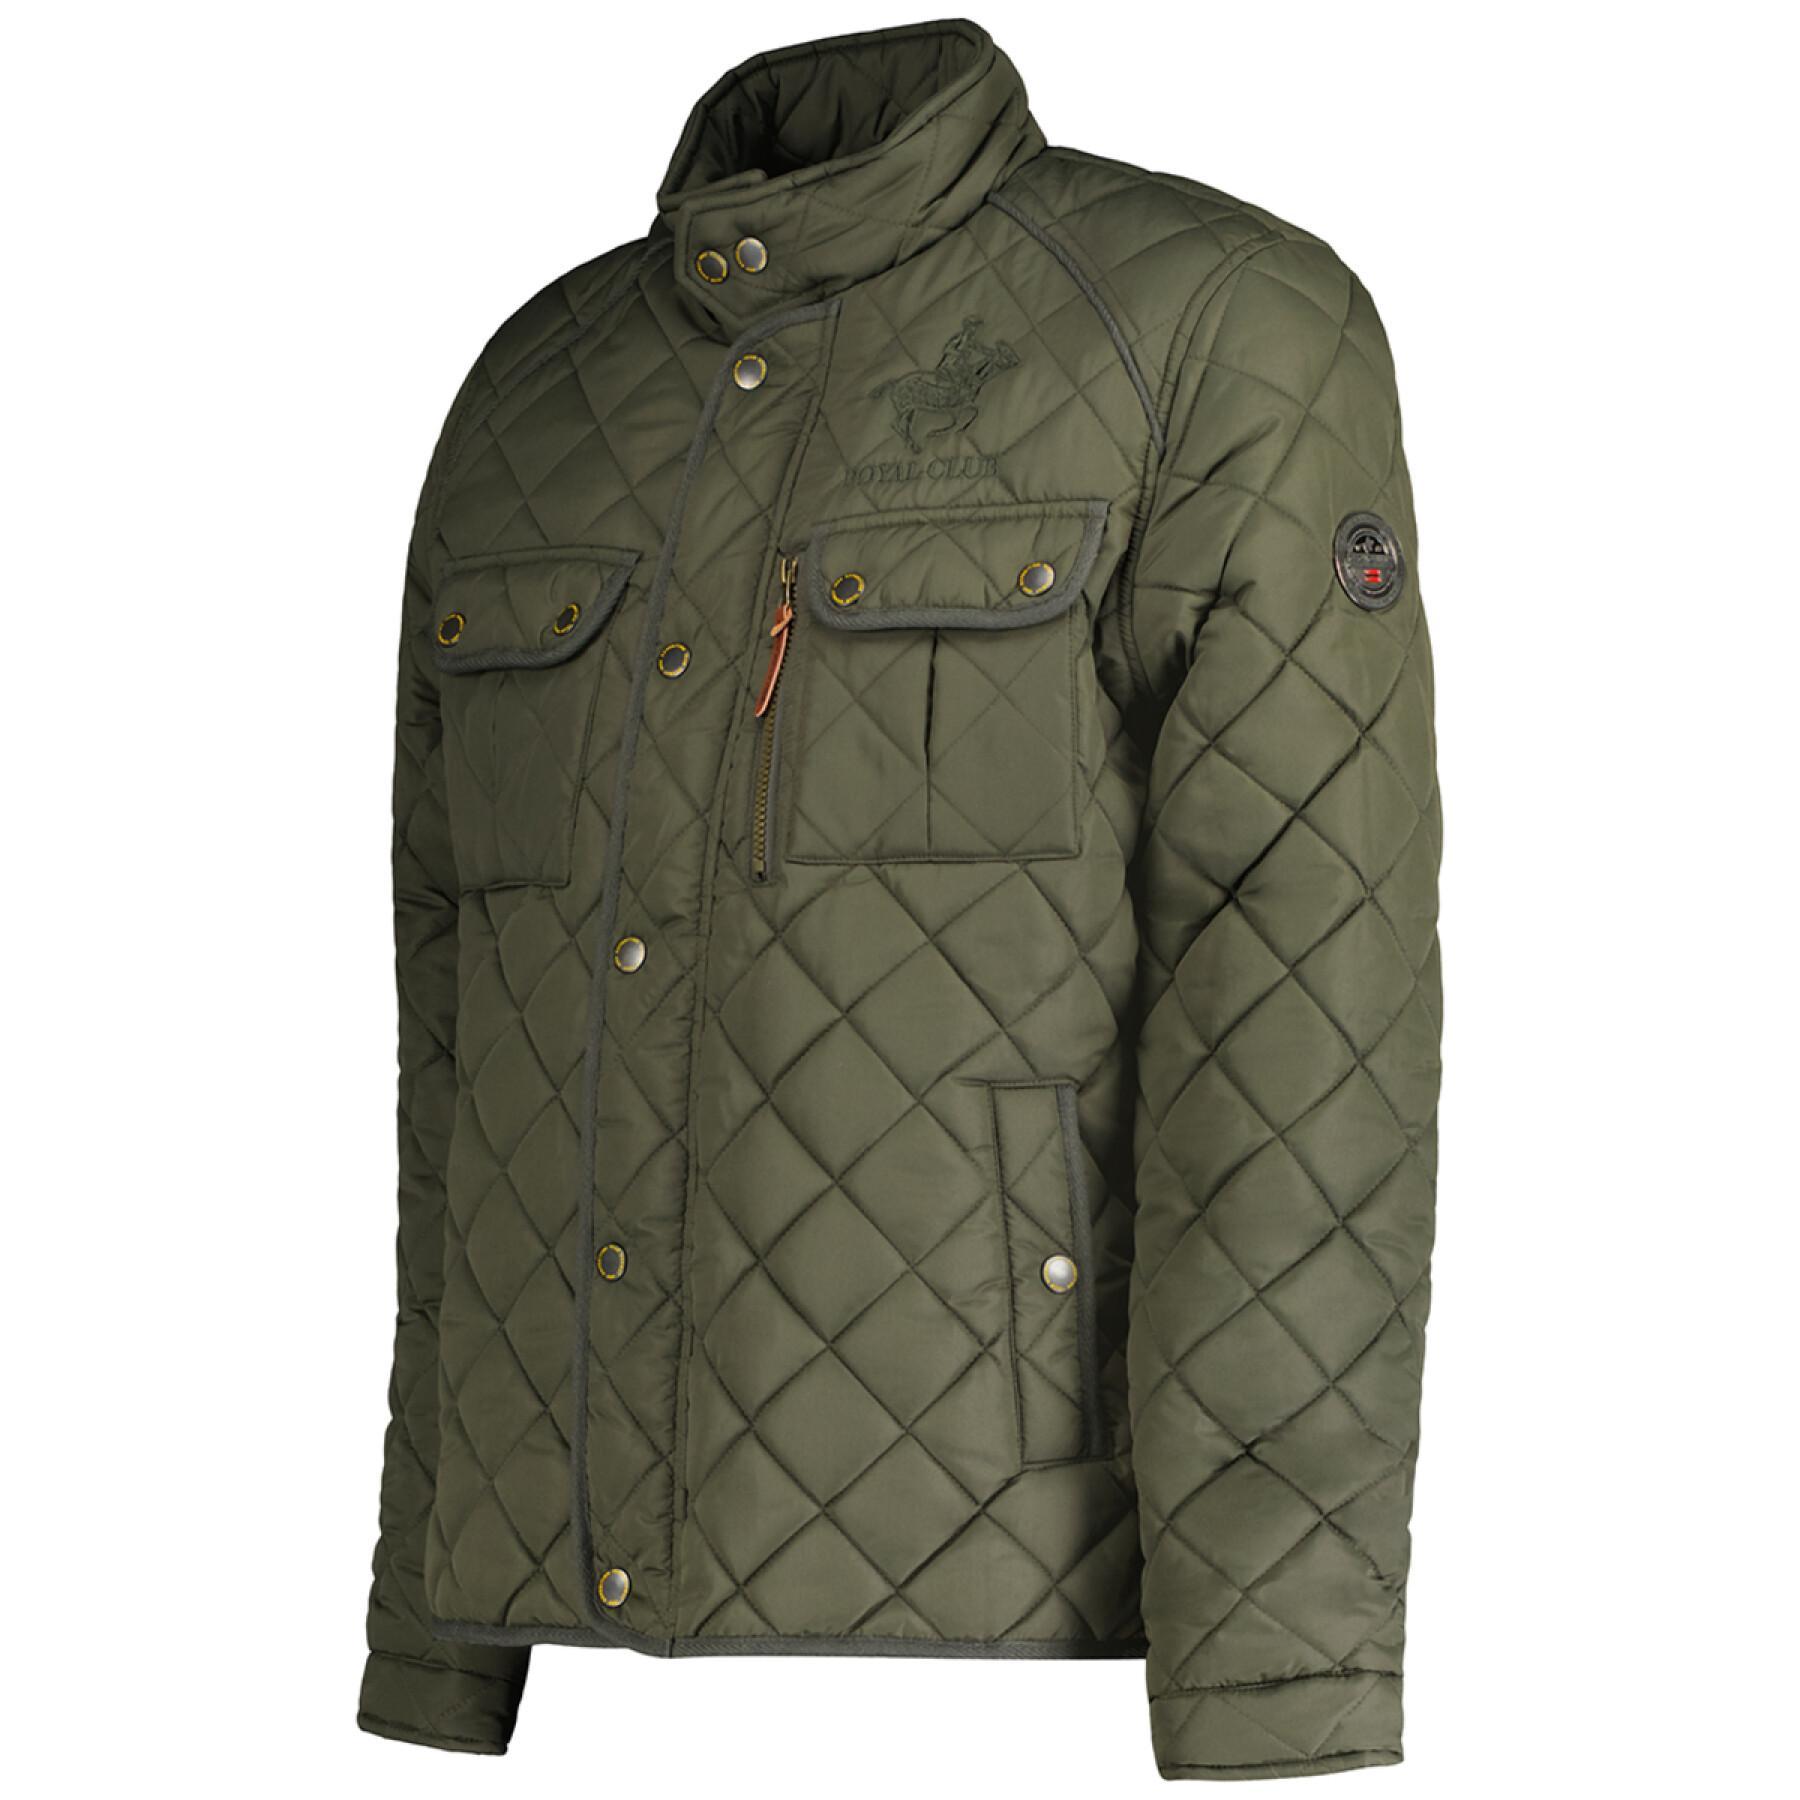 Jacket Geographical Norway Dathan Db Eo